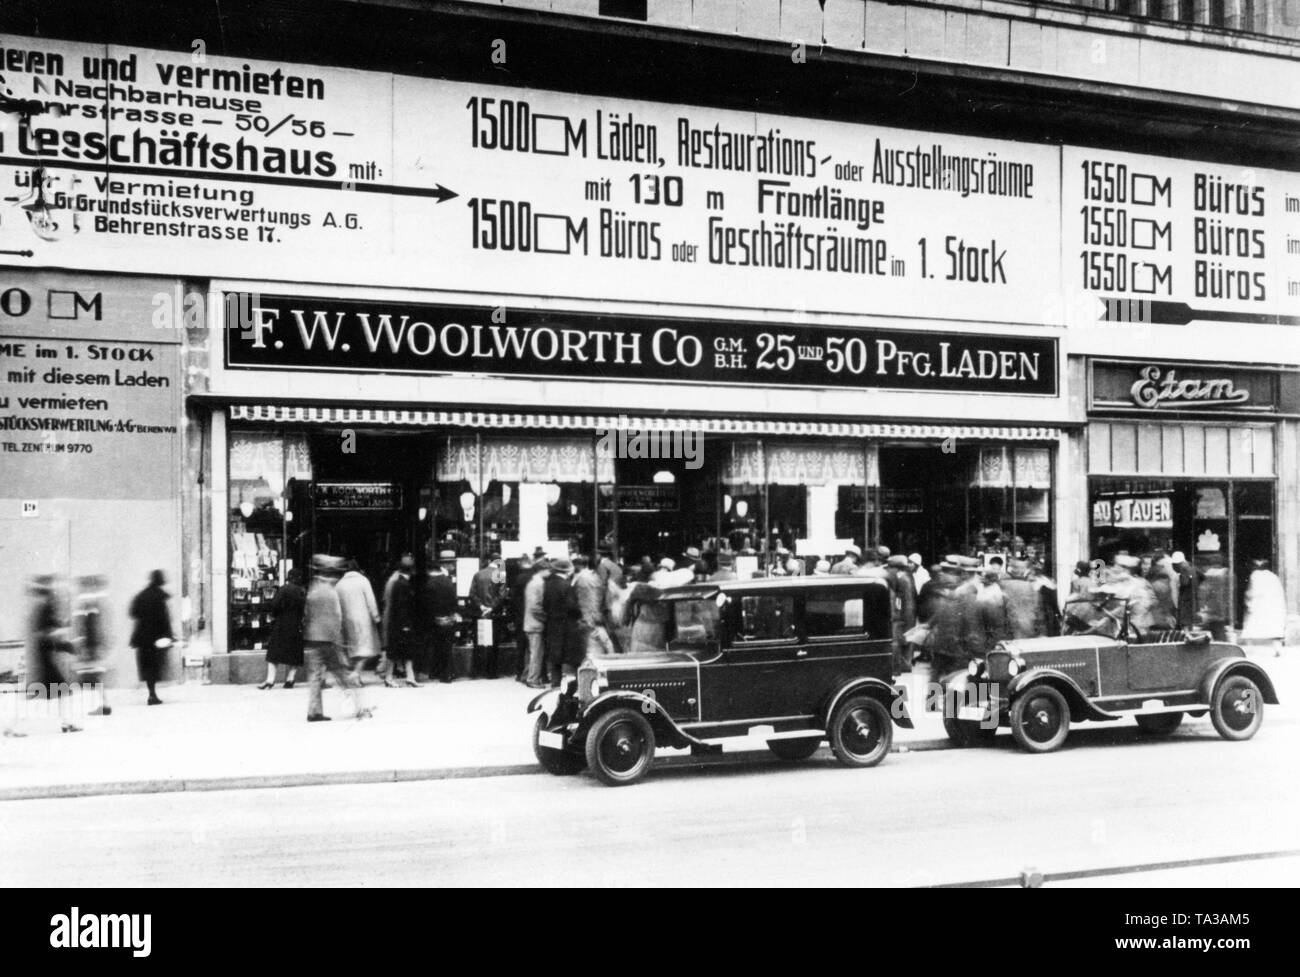 German branch of the American concern Woolworth. The shop sign announces the two price ranges of the department store 'F.W. Woolworth Co G.M.B.H. 25 and 50 Pfg. Laden'. Stock Photo